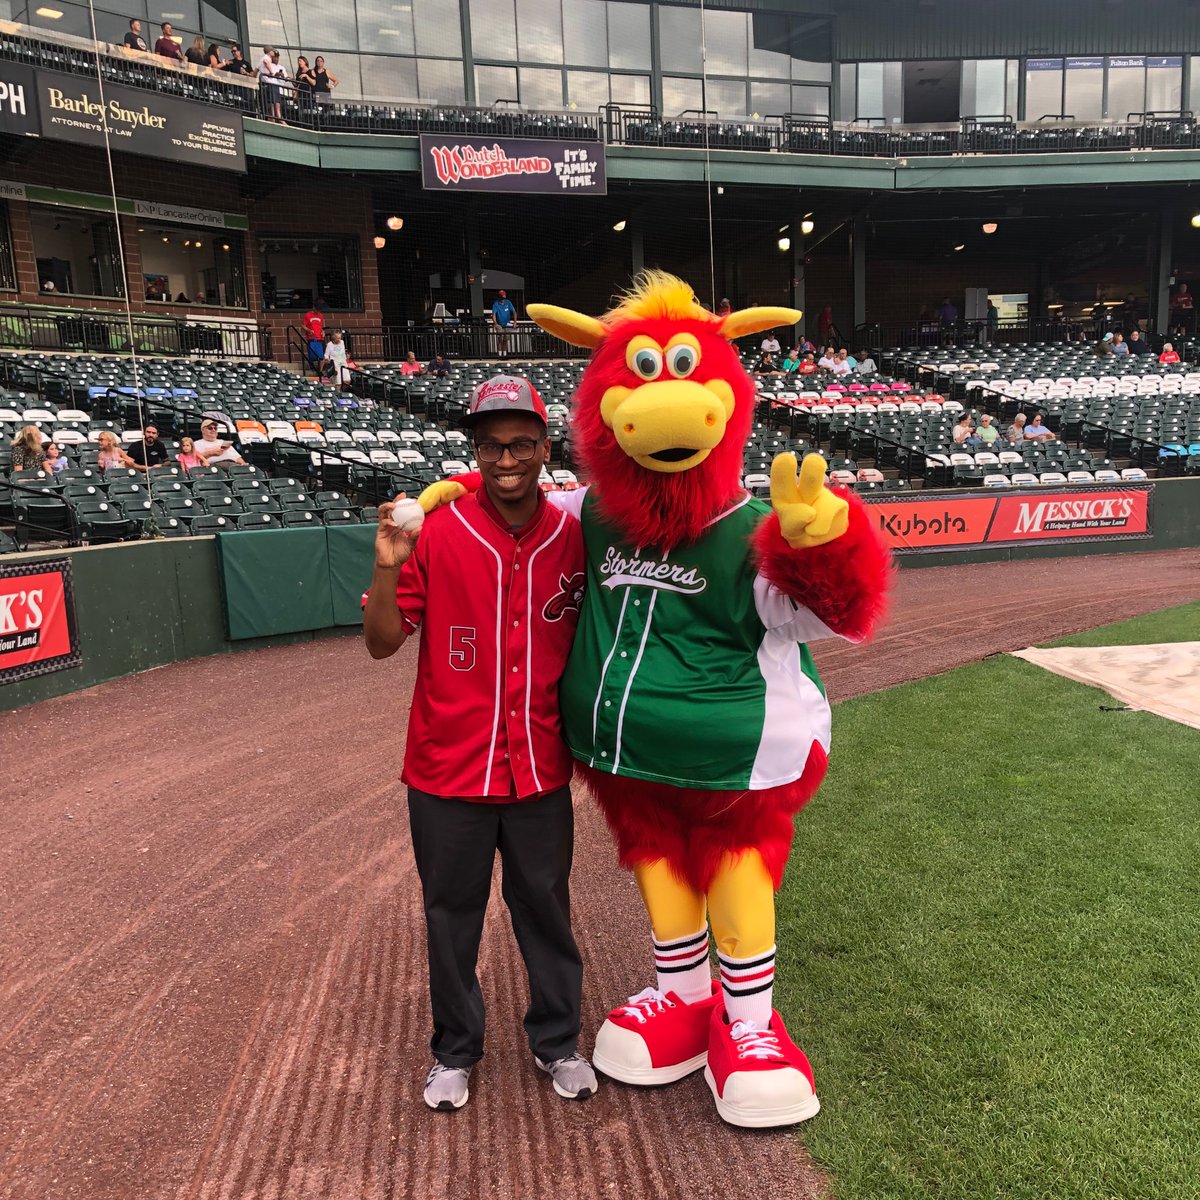 Ethan Poetic takes a picture with Cylo 

#lancasterbarnstormers #red #baseballfield #teammascot #baseball #baseballgame #5 #717 #proudmoment #proud #publicrelations #playball #righthanded #righthhand #ethanpoetic #cylo #homejersey #stripedsocks #retrostyle #retrostylesneakers